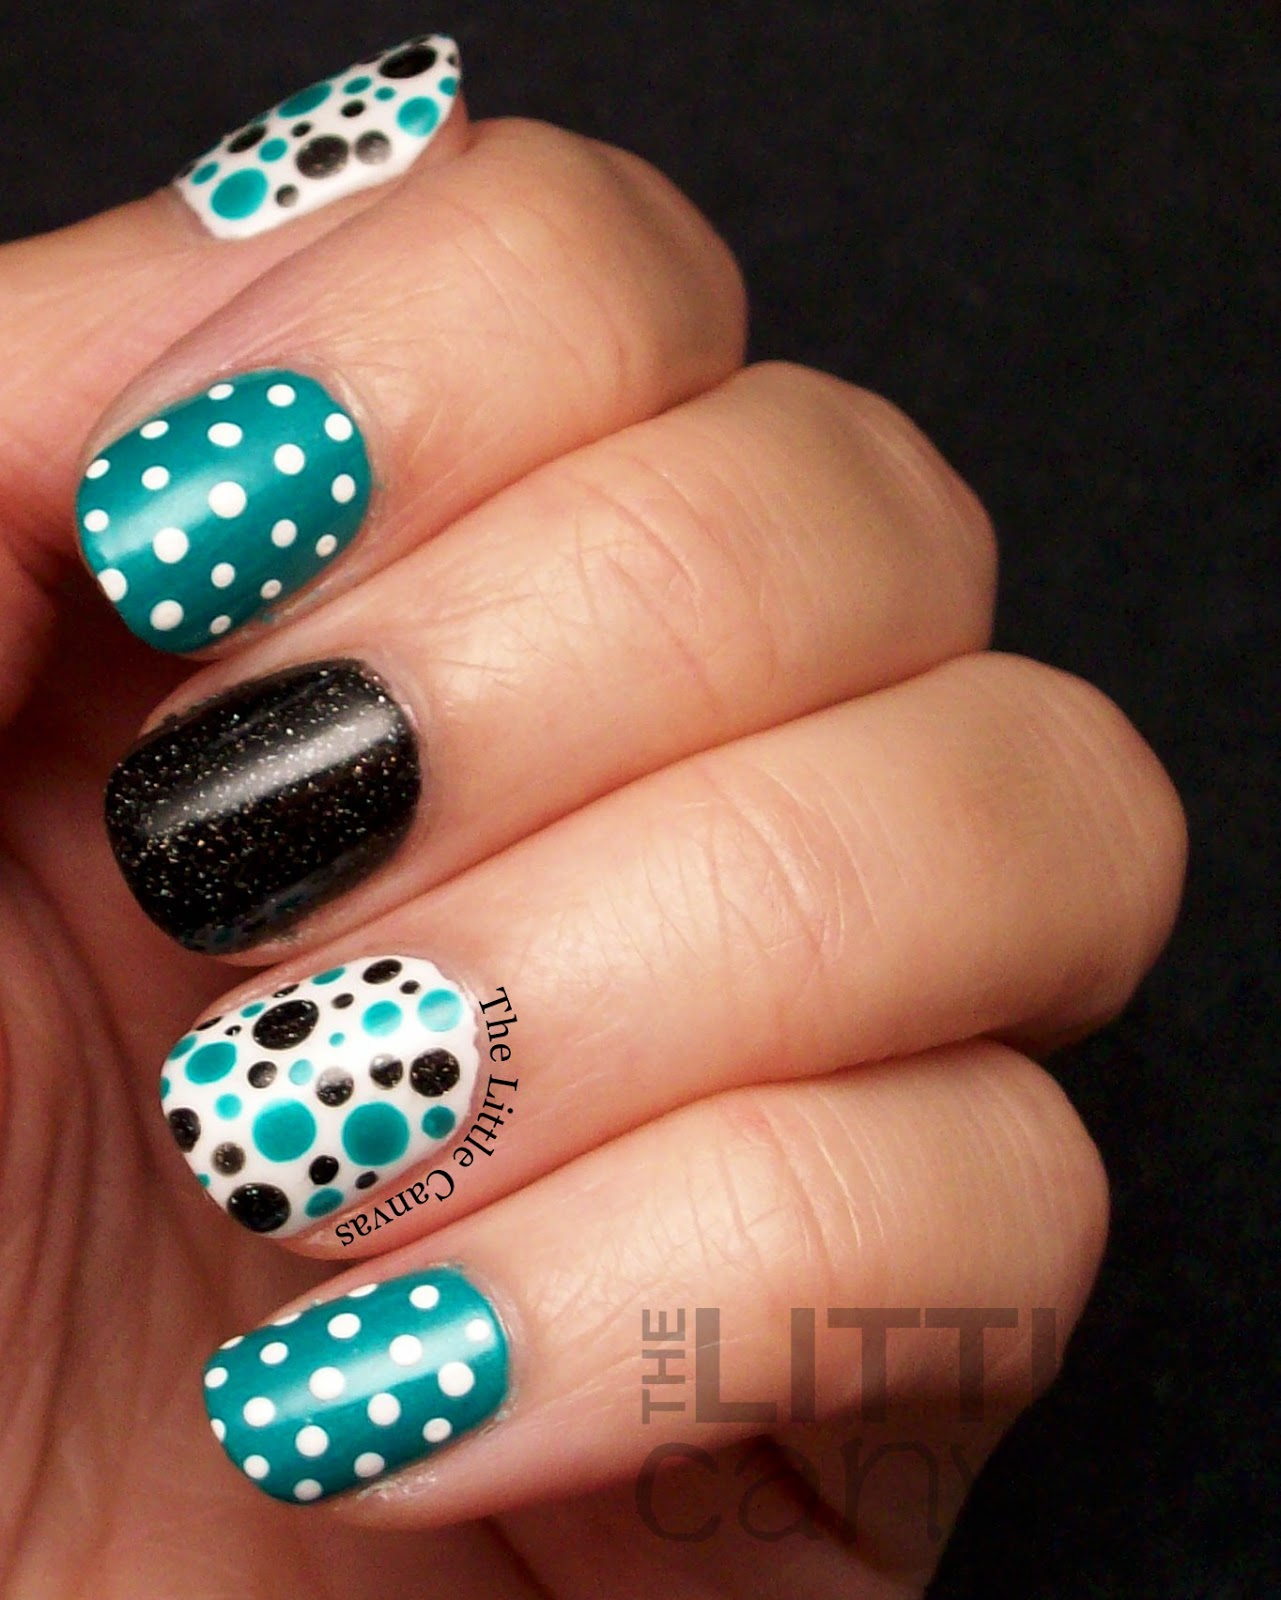 Twinsie Tuesday: Teal Nails for Ovarian Cancer Awareness - The Little ...